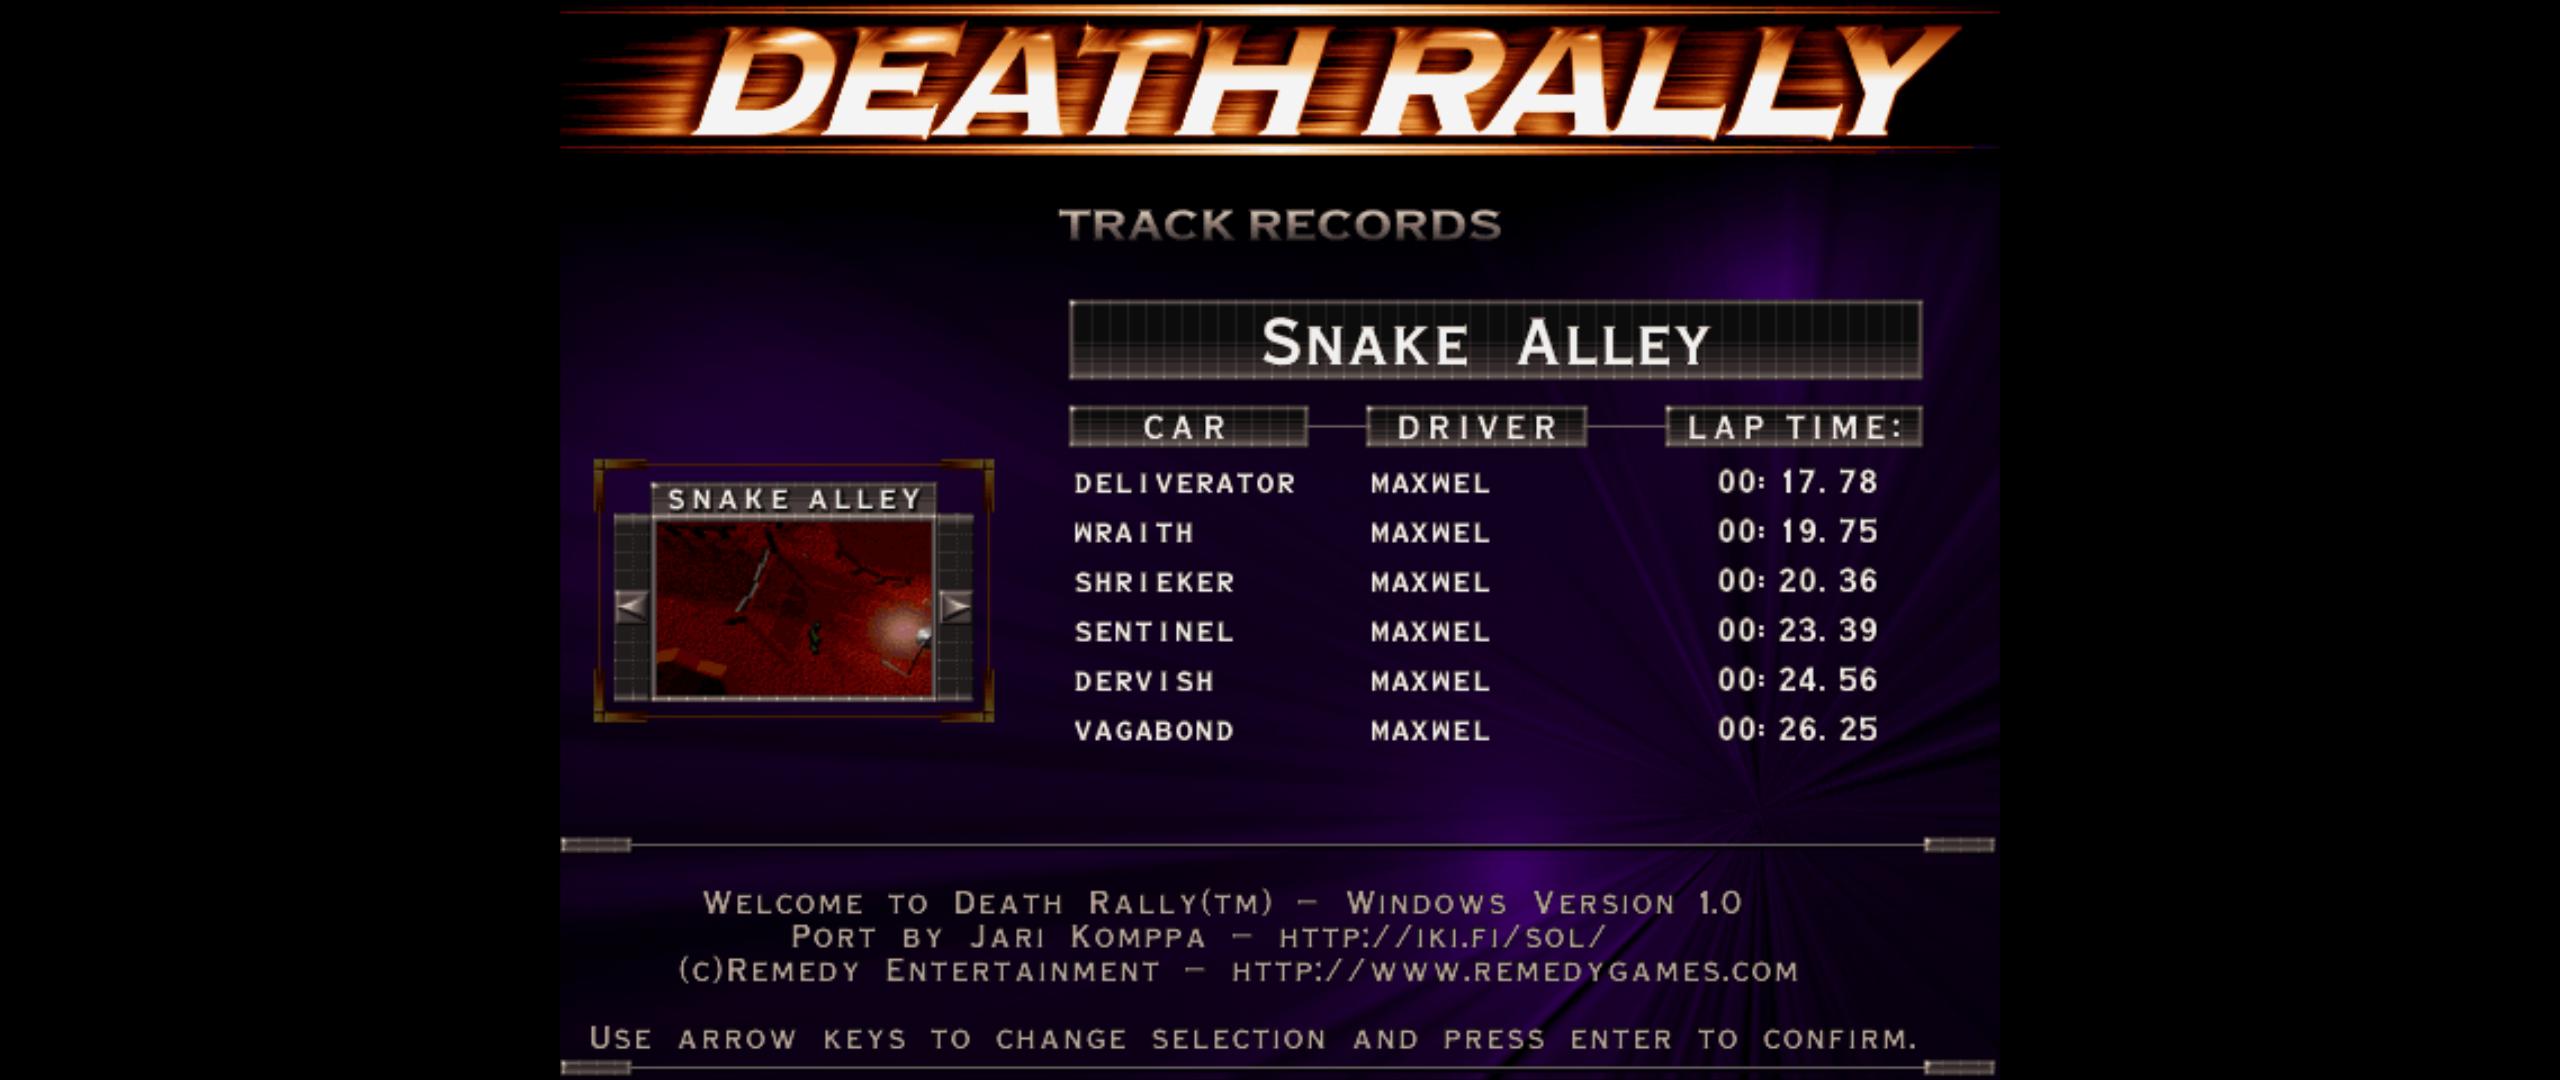 Maxwel: Death Rally [Snake Alley, Sentinel Car] (PC) 0:00:23.39 points on 2016-03-03 02:03:16